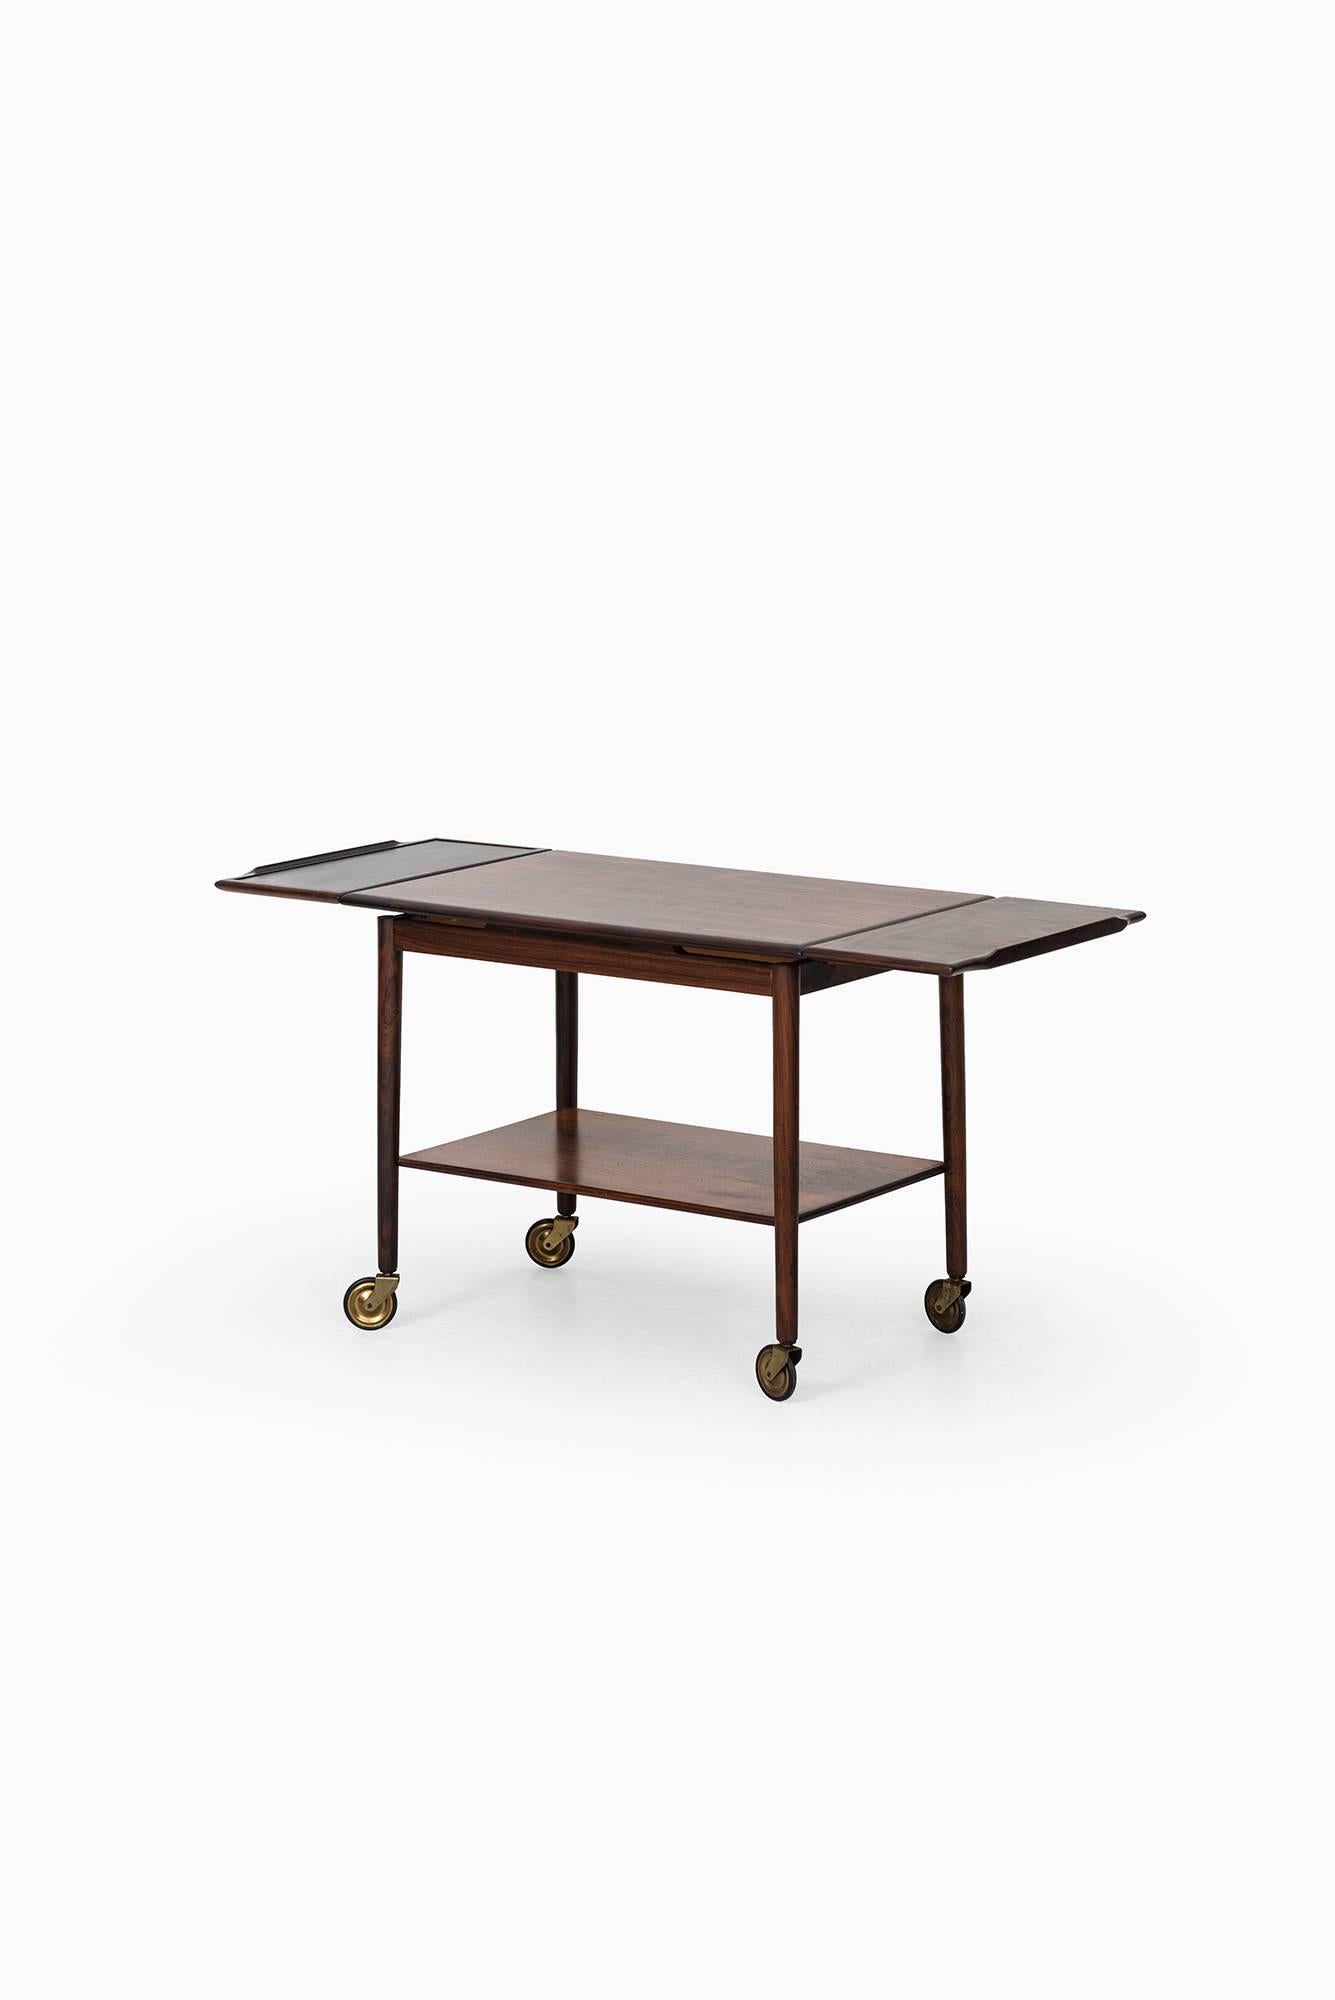 Trolley in rosewood and black formica. Produced by Mogens Hansen in Svendborg in Denmark.